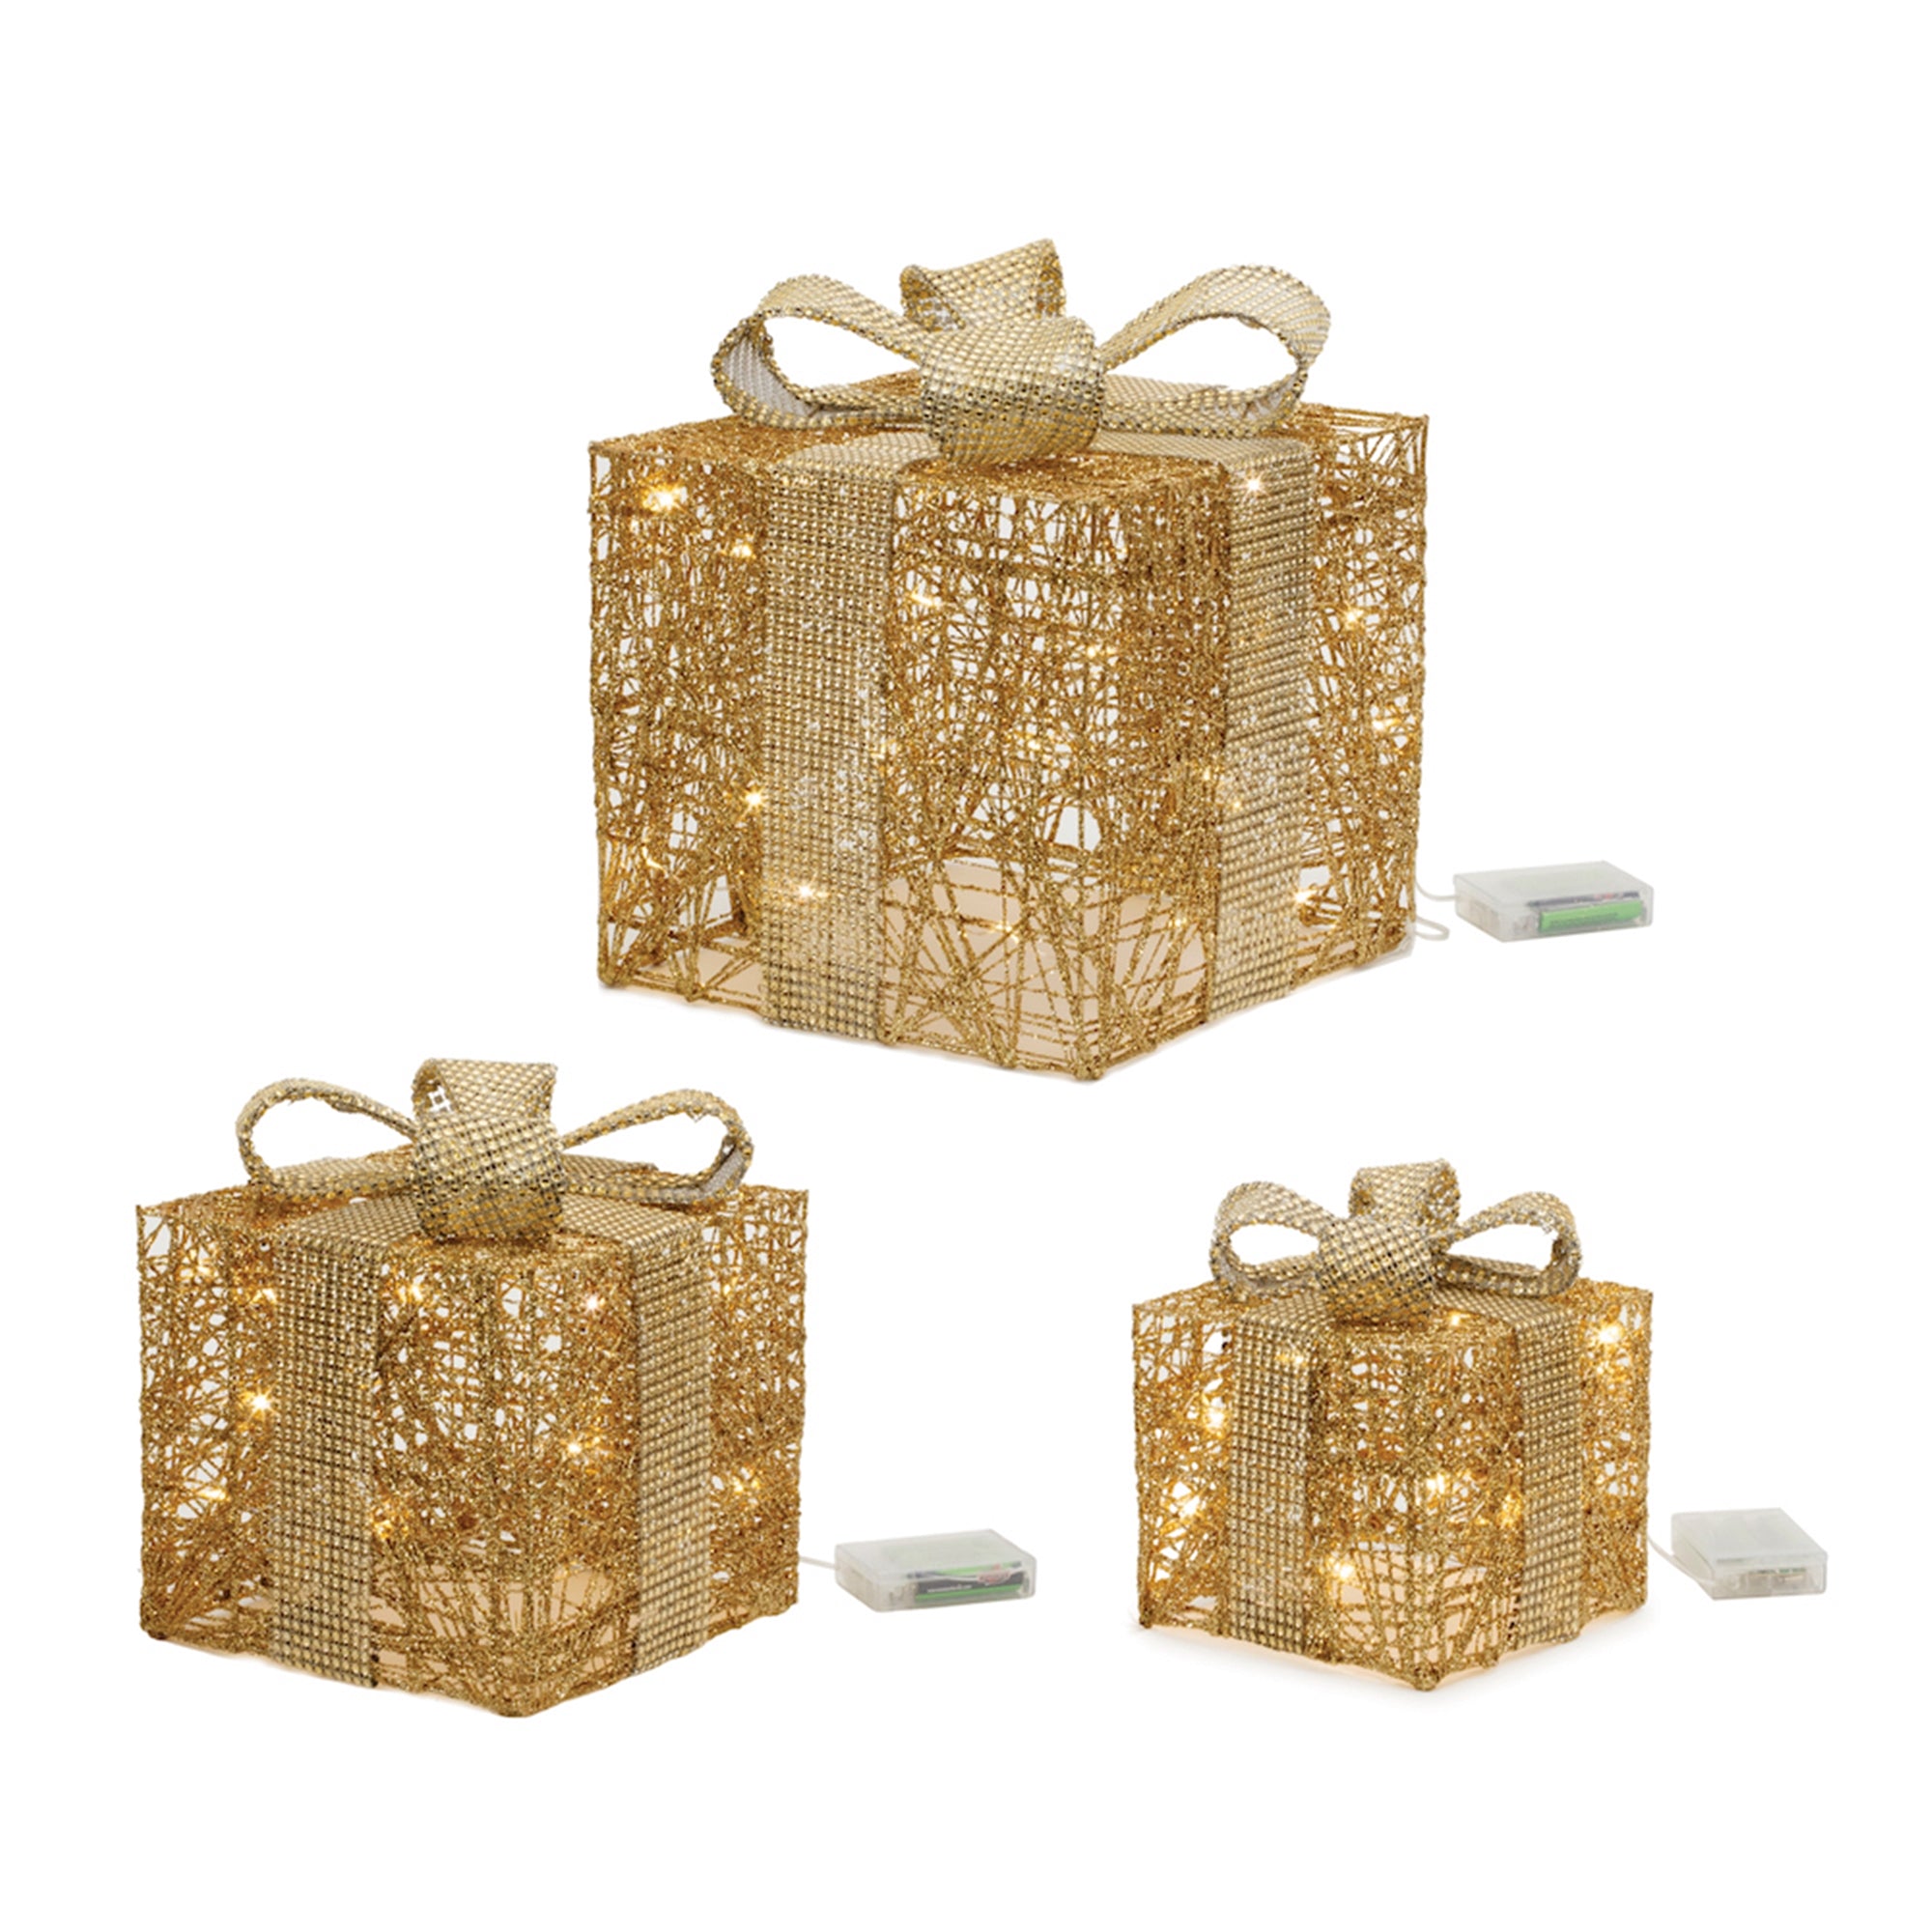 LED Wrapped Presents Display (Set of 3)